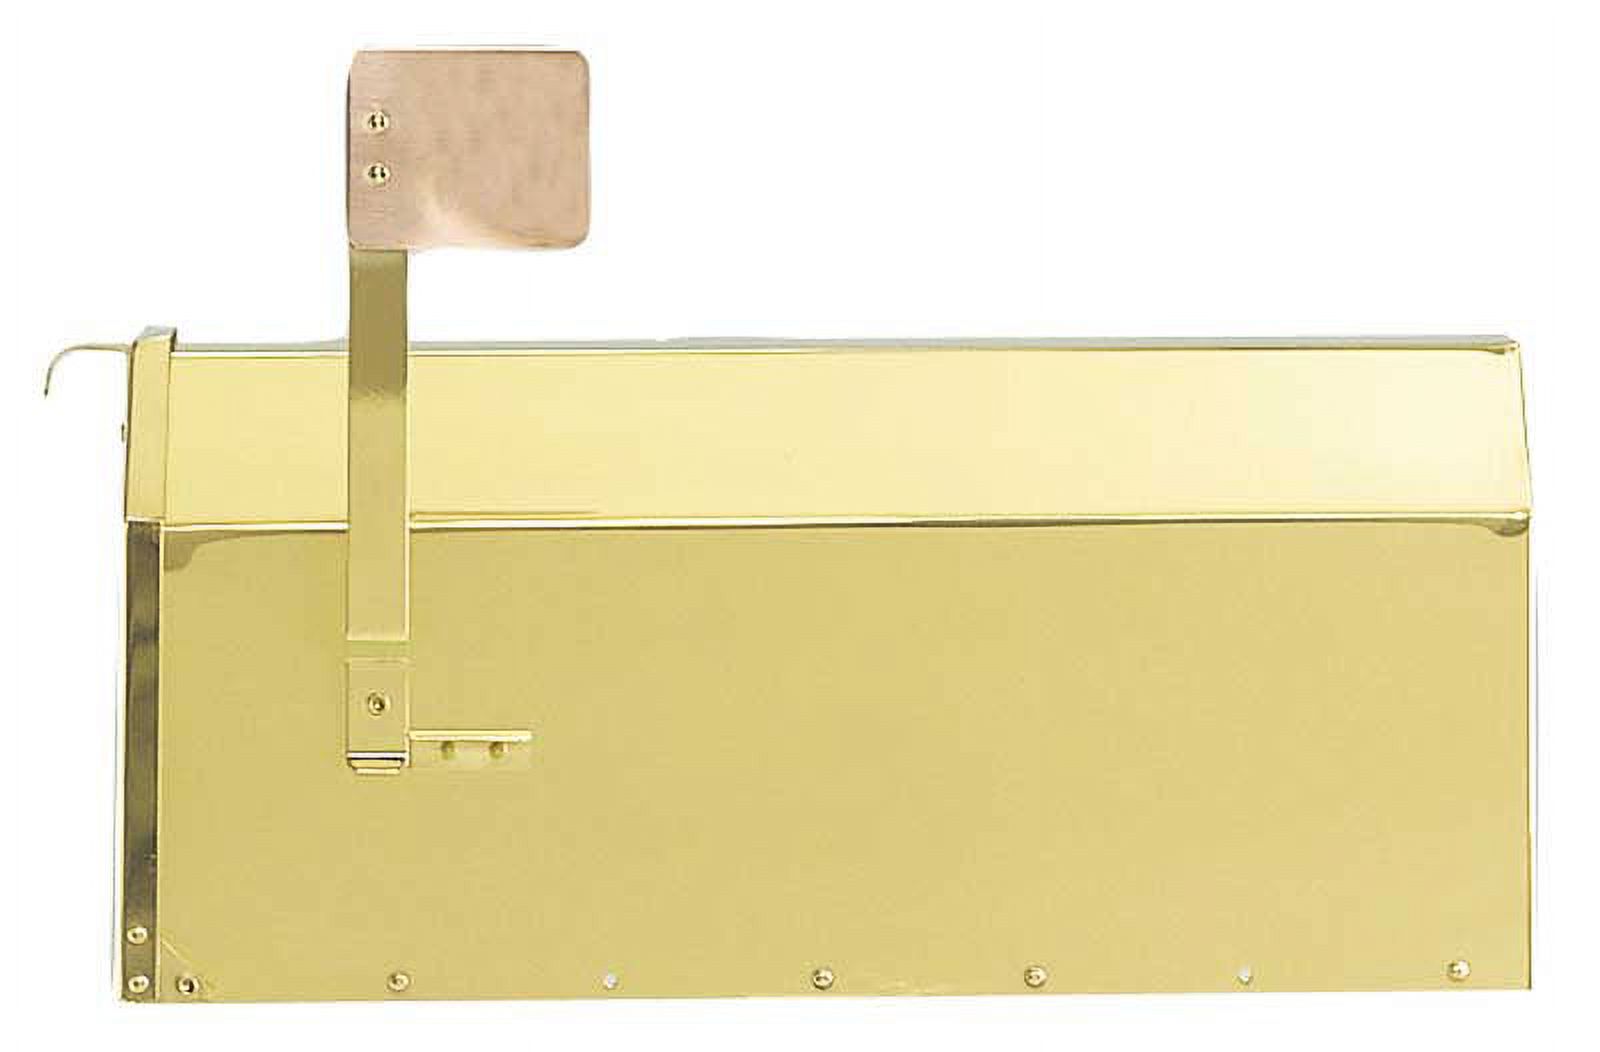 Provincial Collection Brass Mailboxes Polished Brass - image 1 of 2